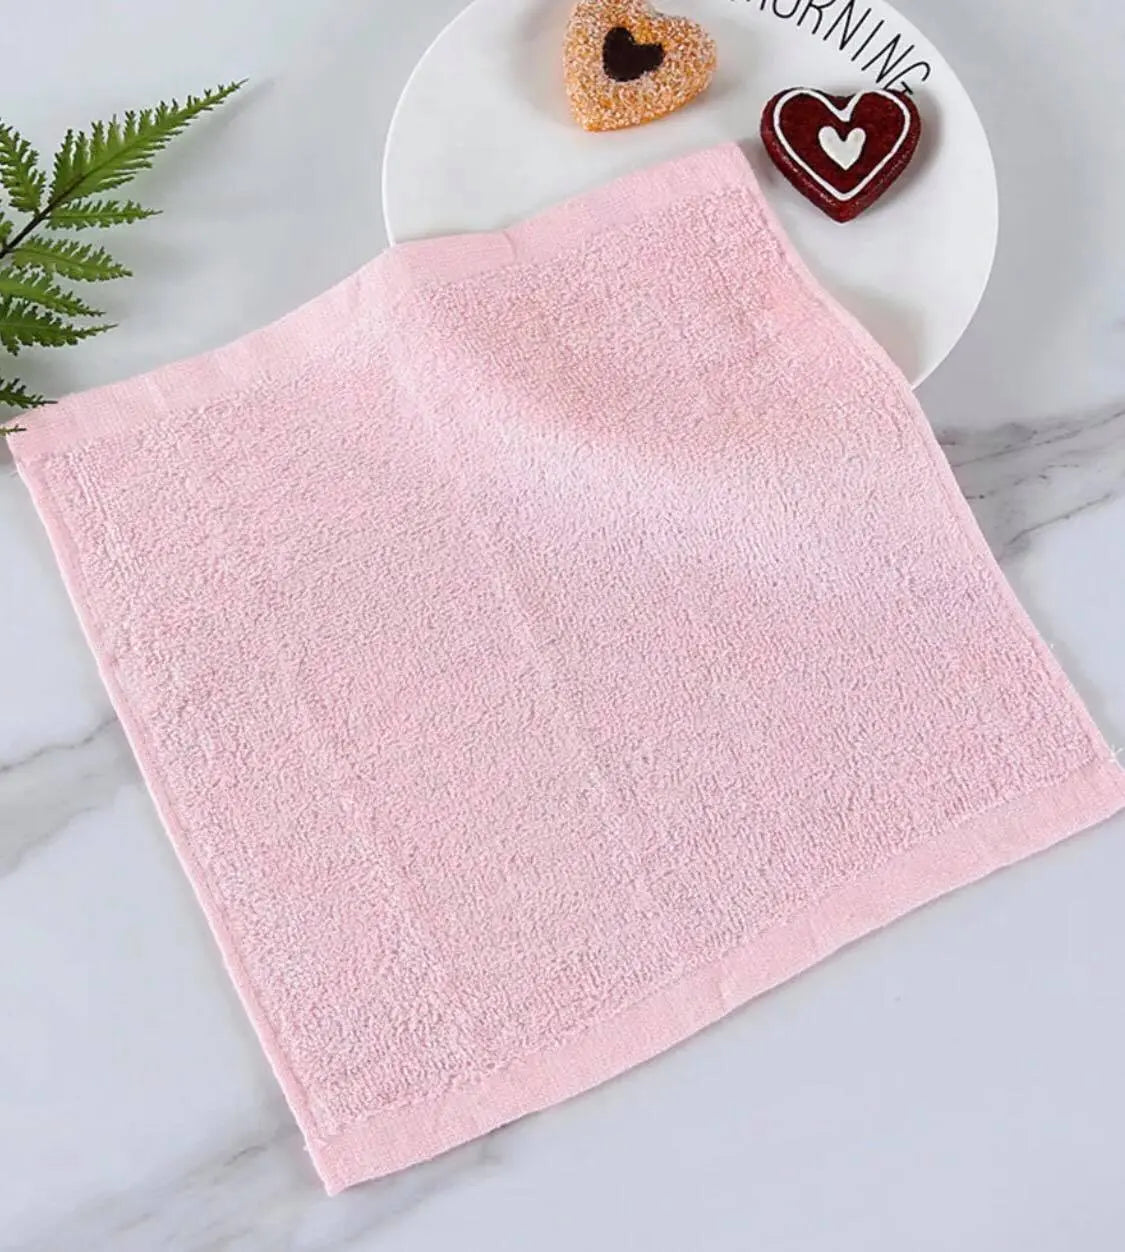 2 X Bamboo Fabric Square Small Hand Towel Face Towel Soft Cool Comfortable